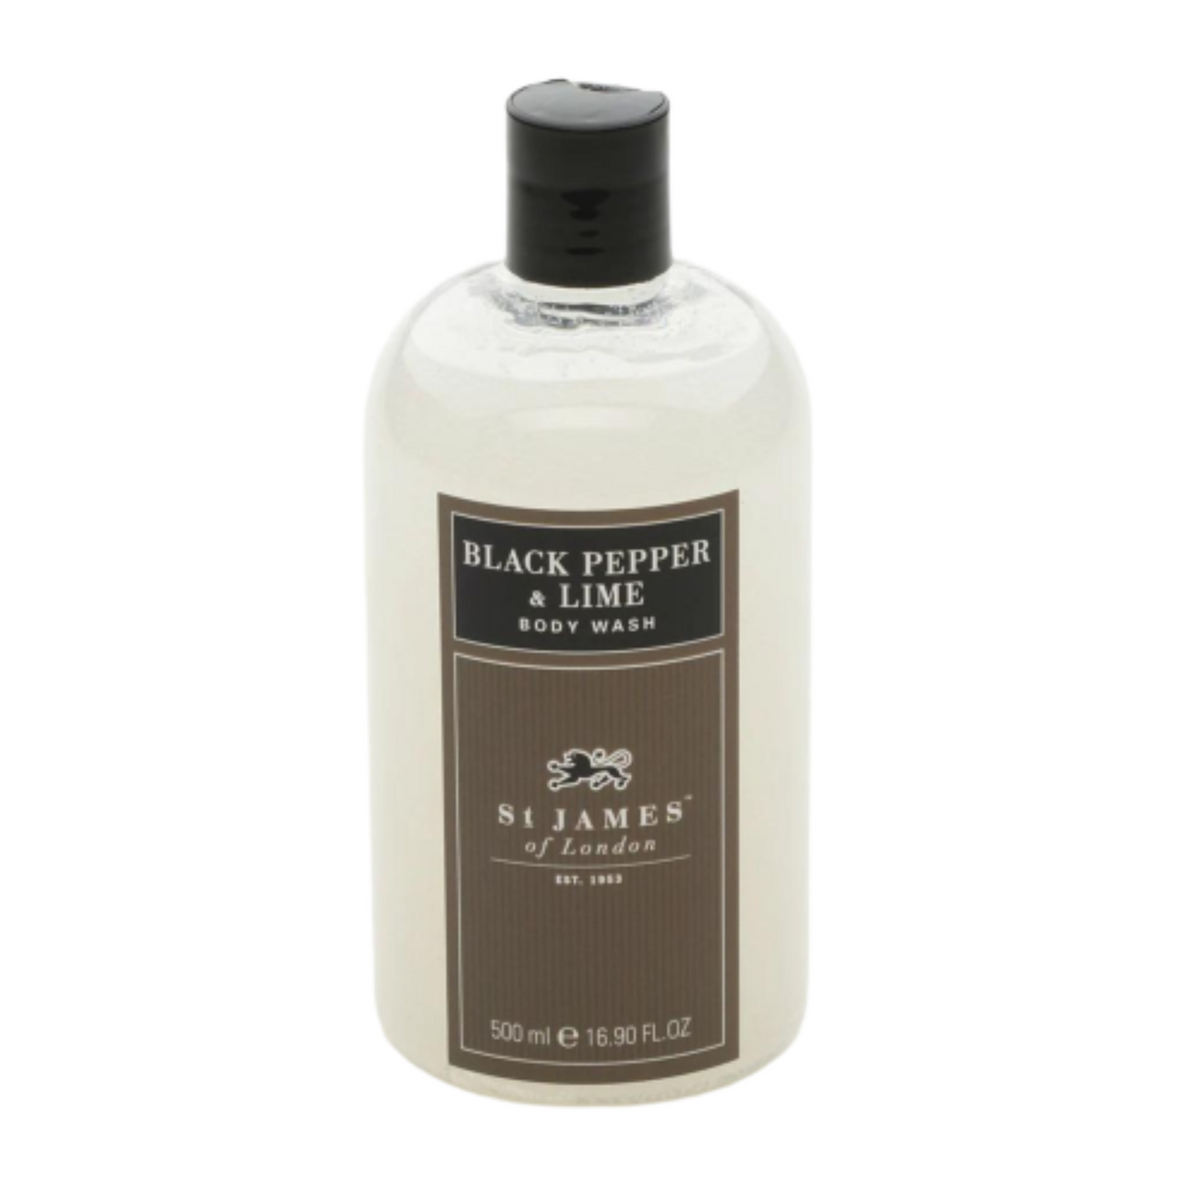 Primary Image of Black Pepper & Lime Body Wash